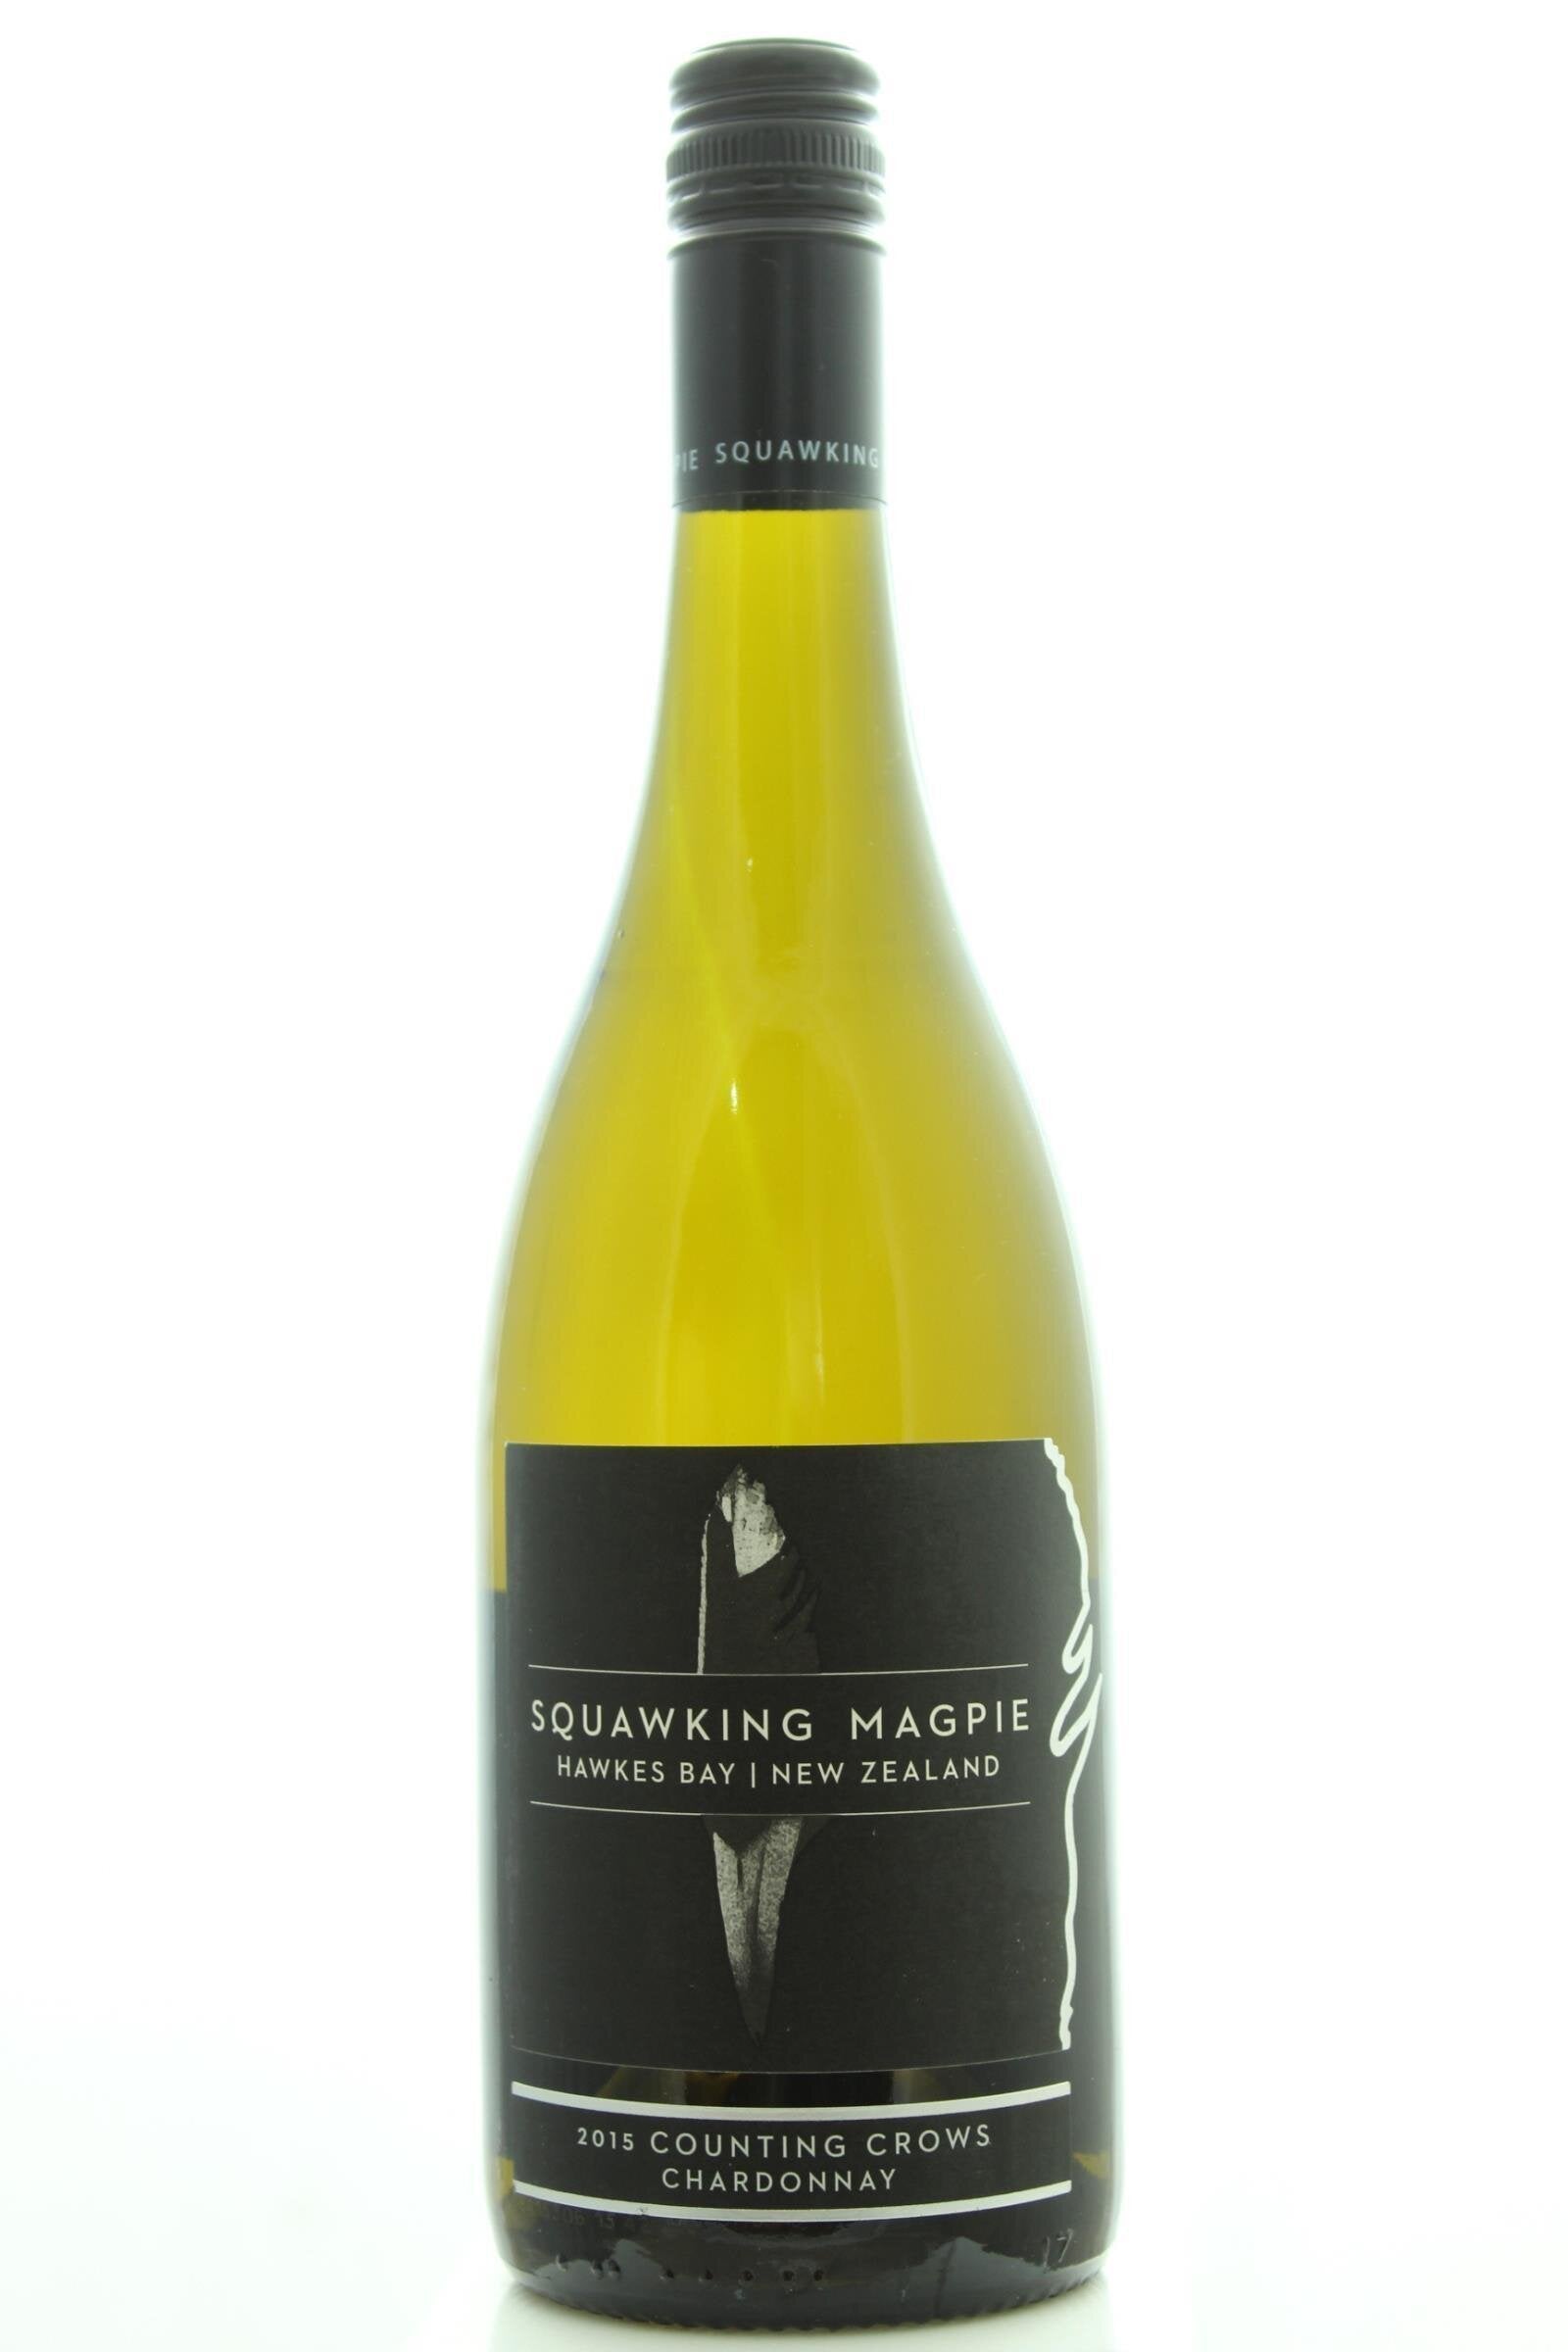 Squawking Magpie, Counting Crows, Hawkes Bay, Chardonnay 2015